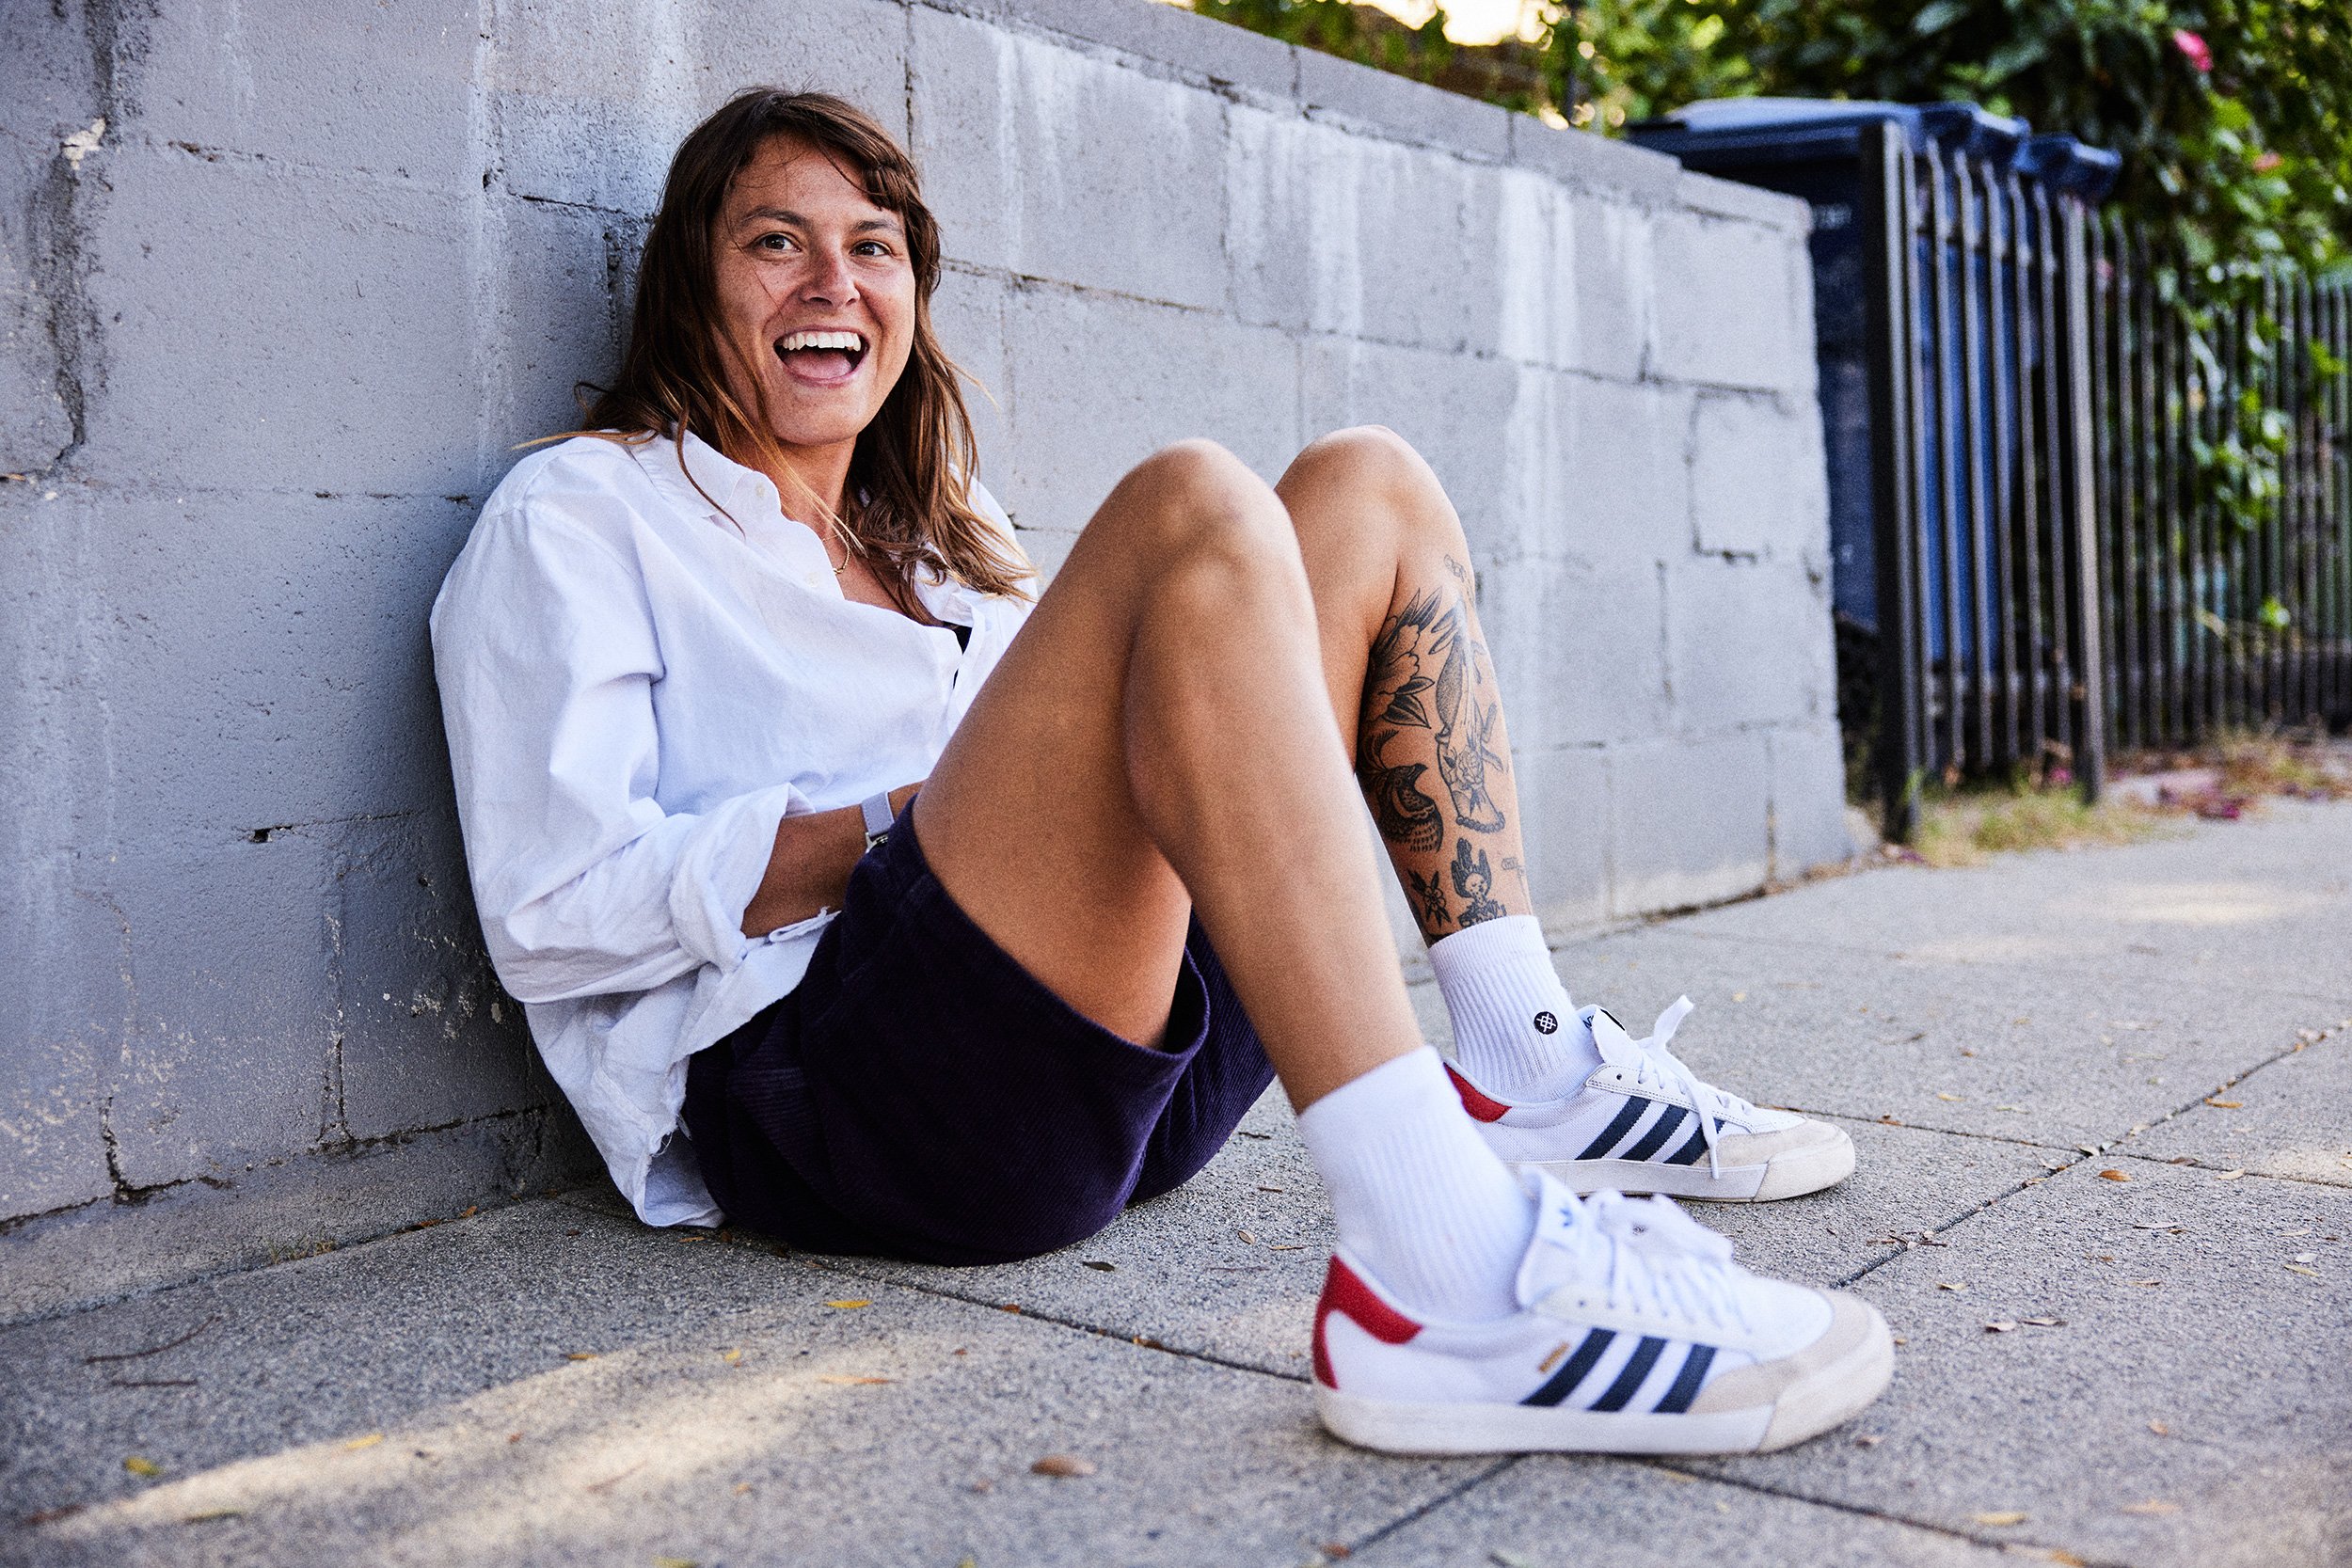 Conciliador Aparecer Valiente Nora Vasconcello's New Adidas Pro Model Shoe Drops Today - Get Em' Fast! —  Girl Is NOT A 4 Letter Word